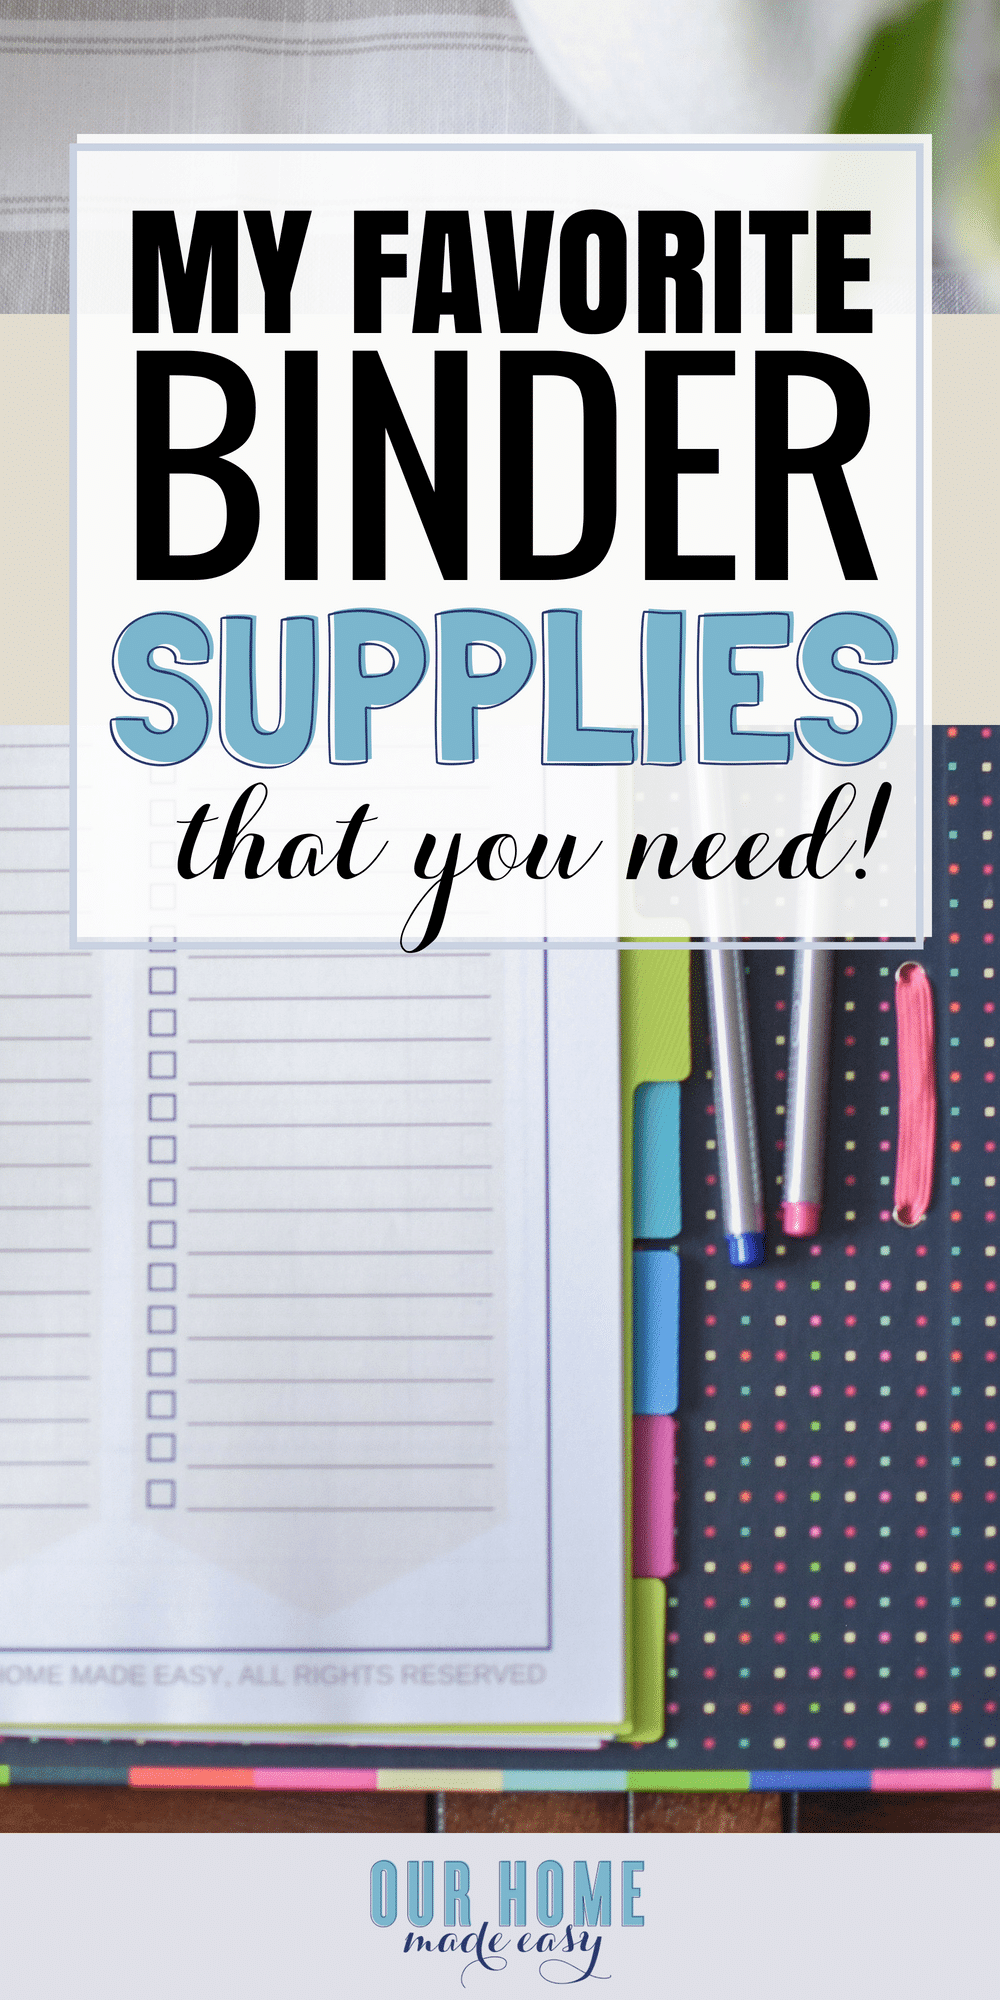 My favorite binder supplies! I recommend some fun and decorative supplies to dress up your home binder